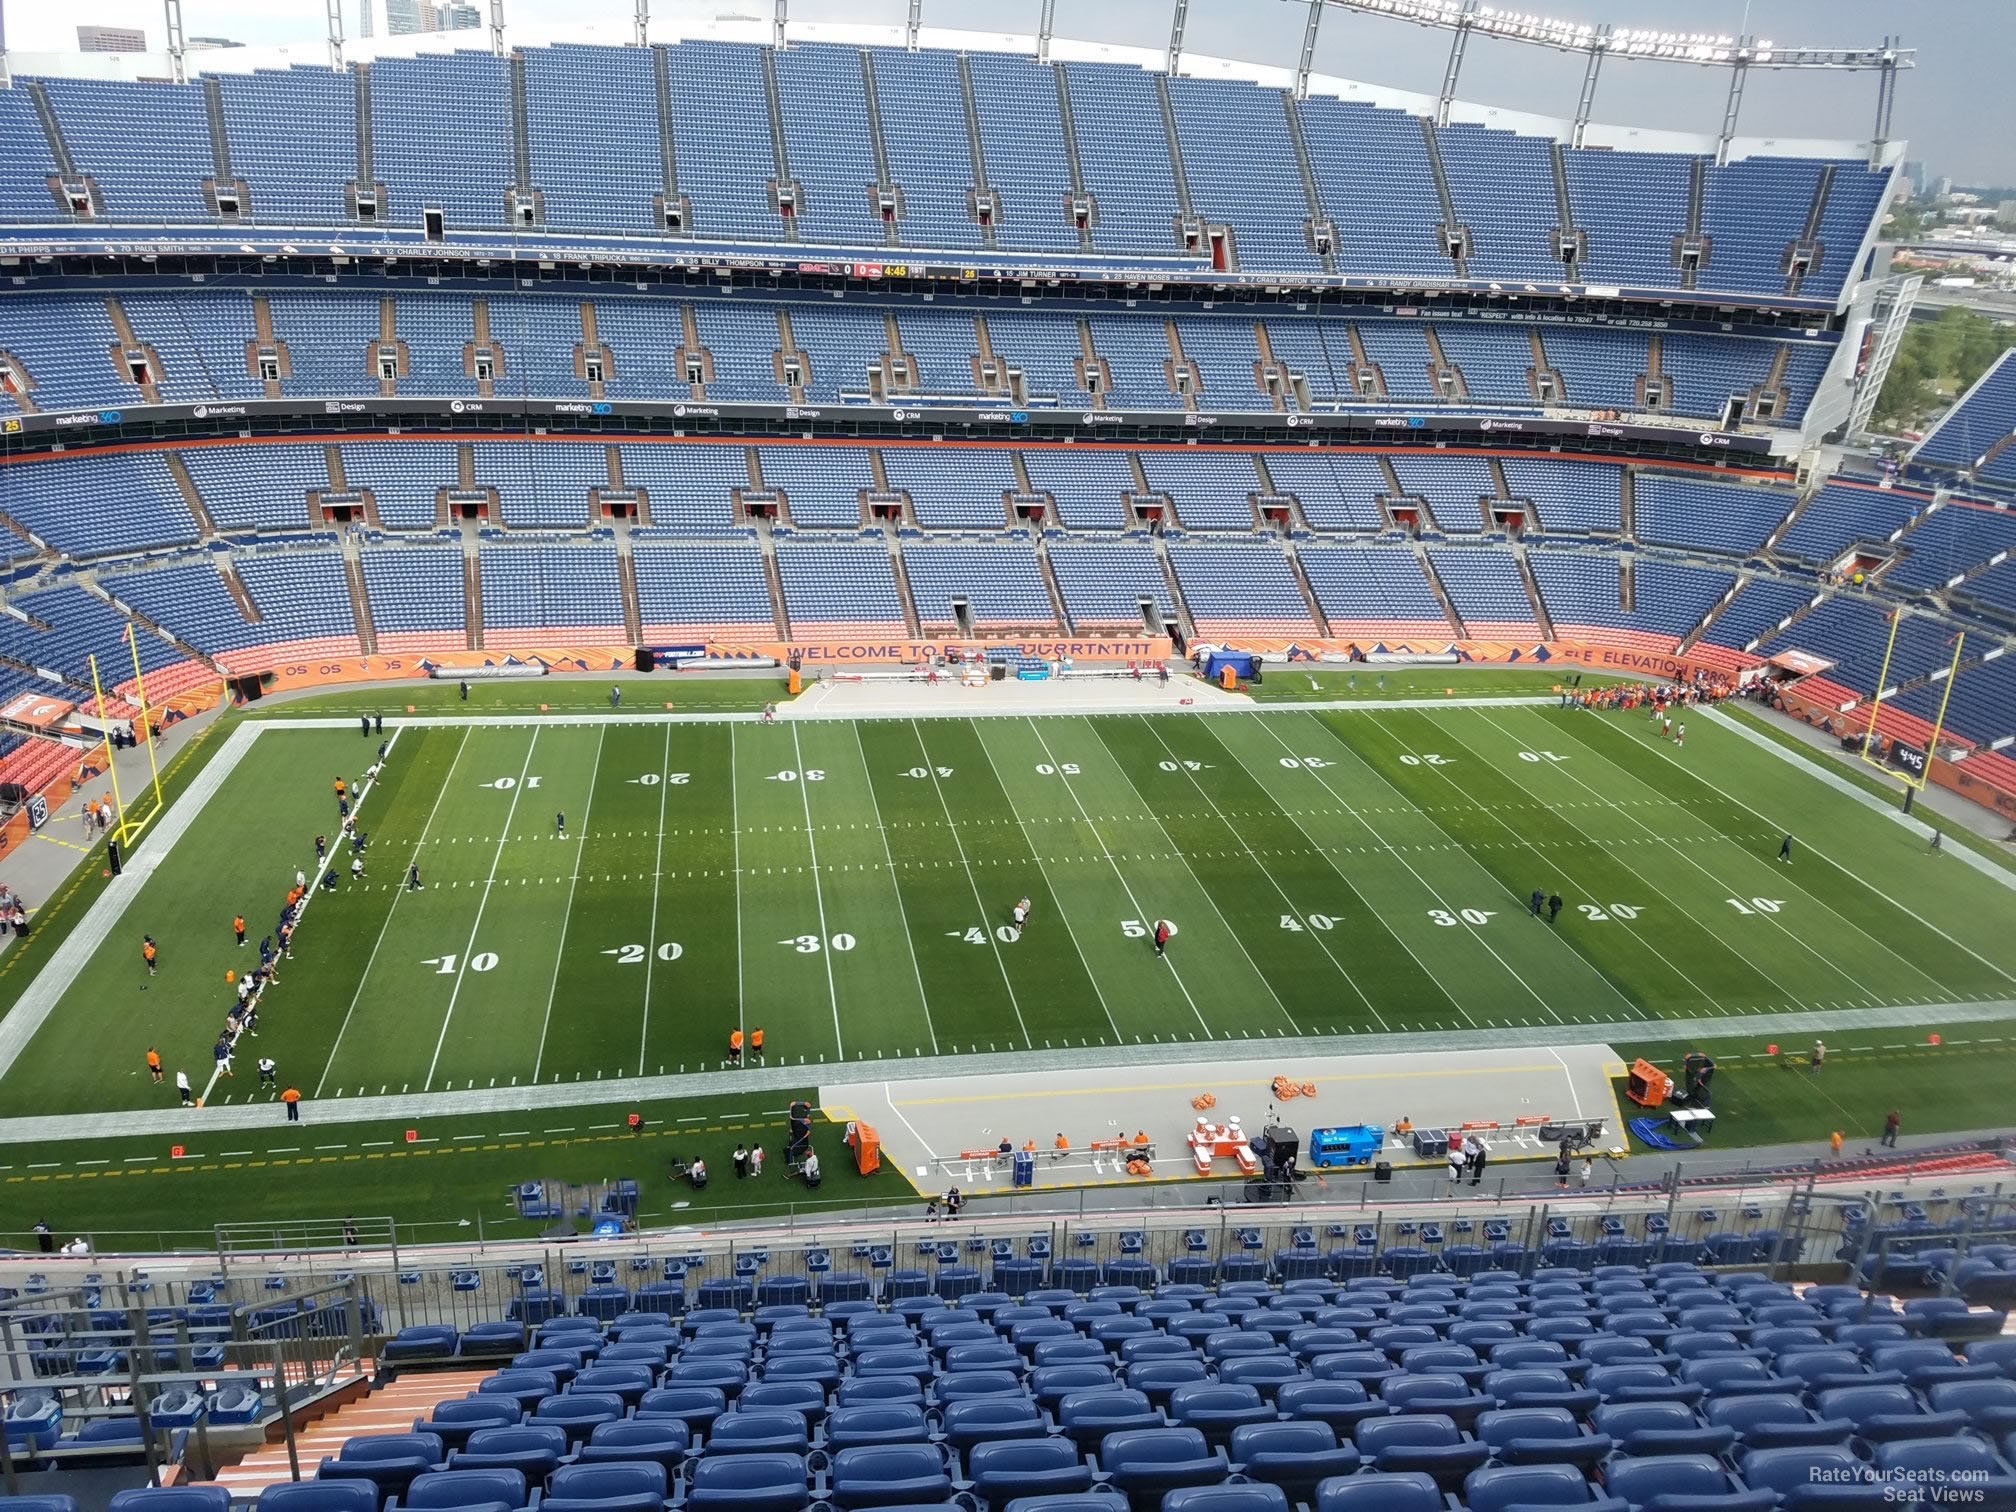 section 510, row 16 seat view  - empower field (at mile high)